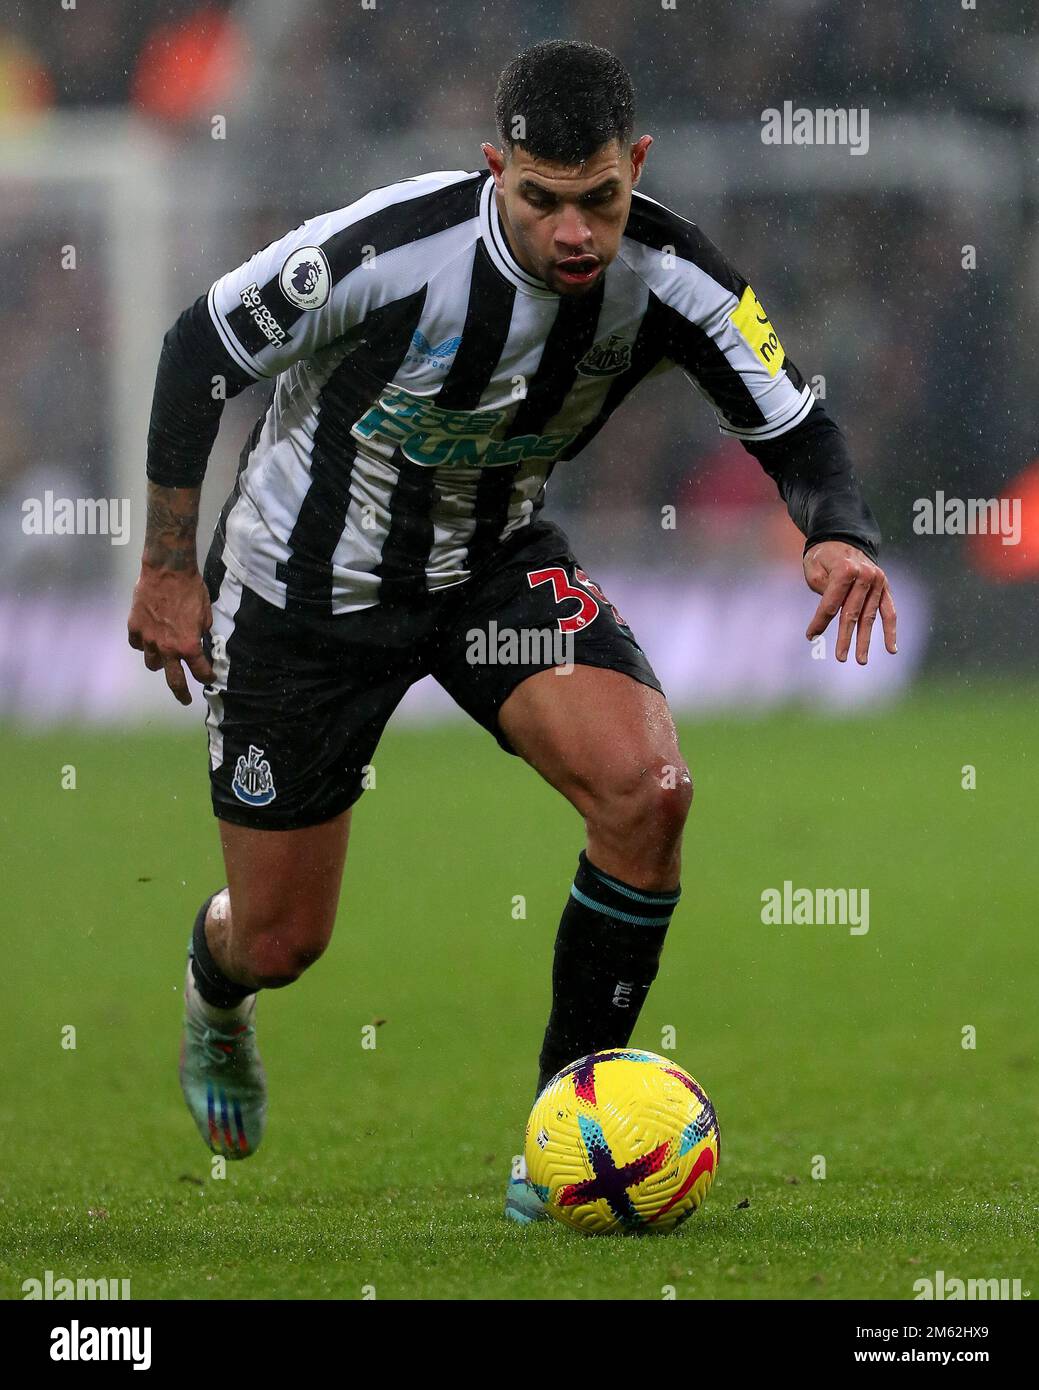 Newcastle, UK. 31st December 2022. Bruno Guimaraes of Newcastle United during the Premier League match between Newcastle United and Leeds United at St